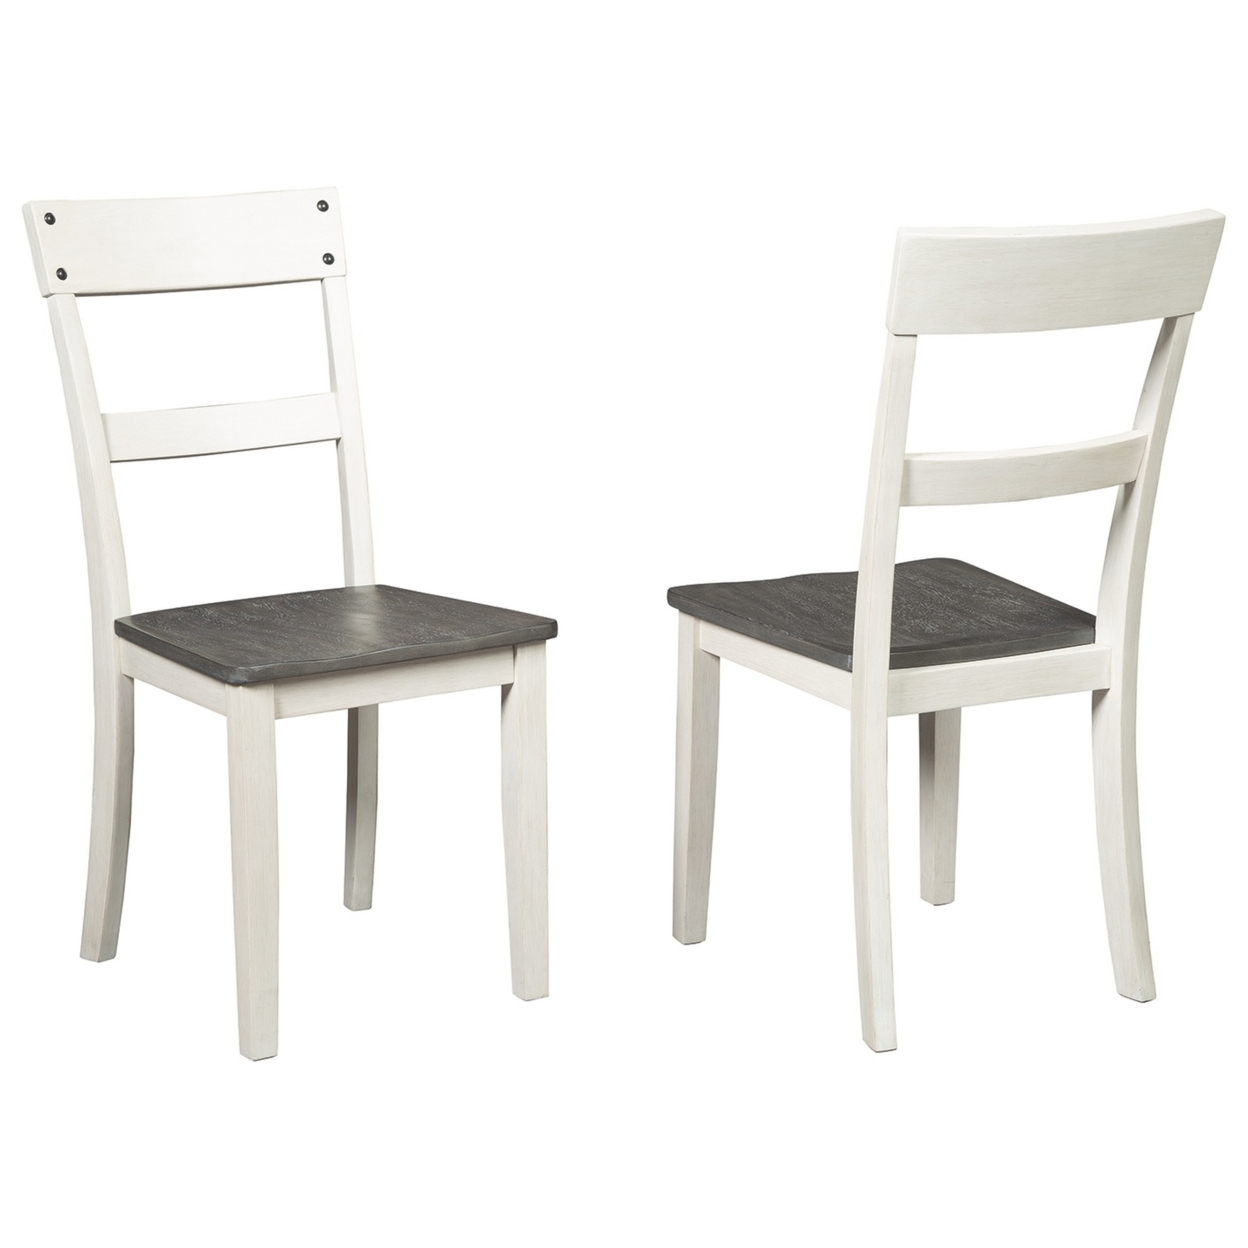 Farmhouse Style Wooden Side Chair With Ladder Style Back, Set Of 2, White- Saltoro Sherpi